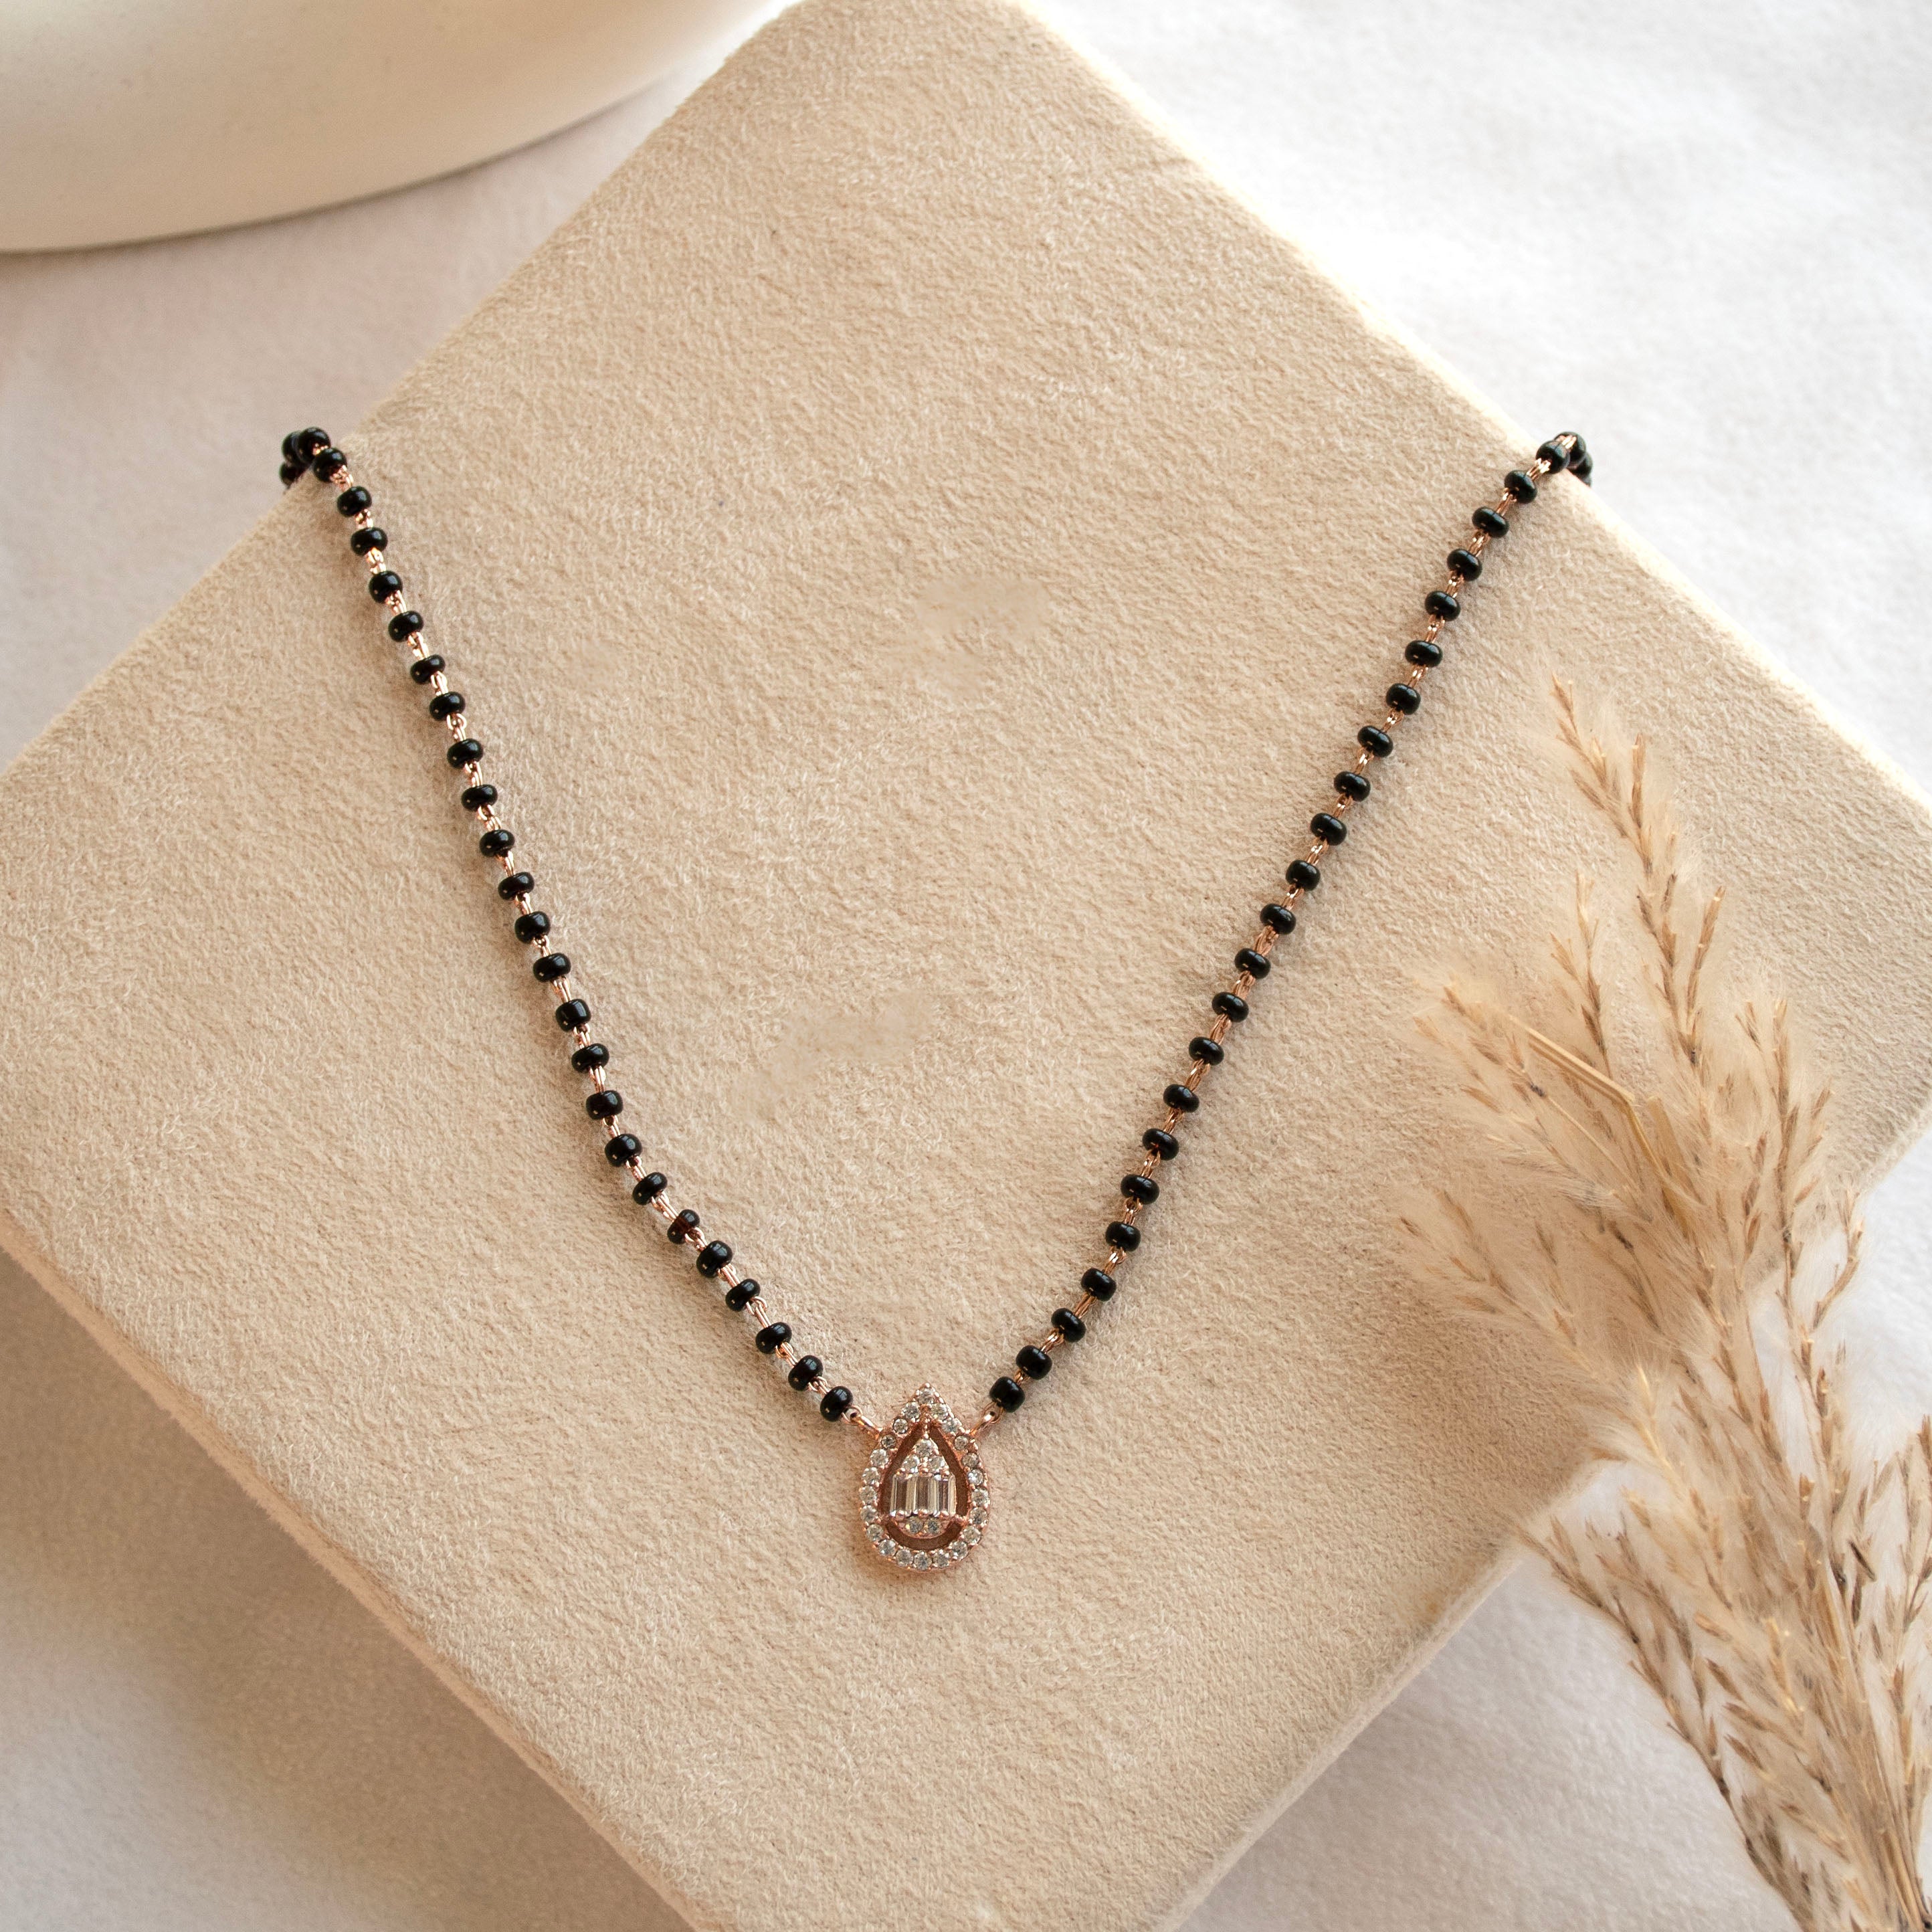 Pear Single Stone Mangalsutra Necklace